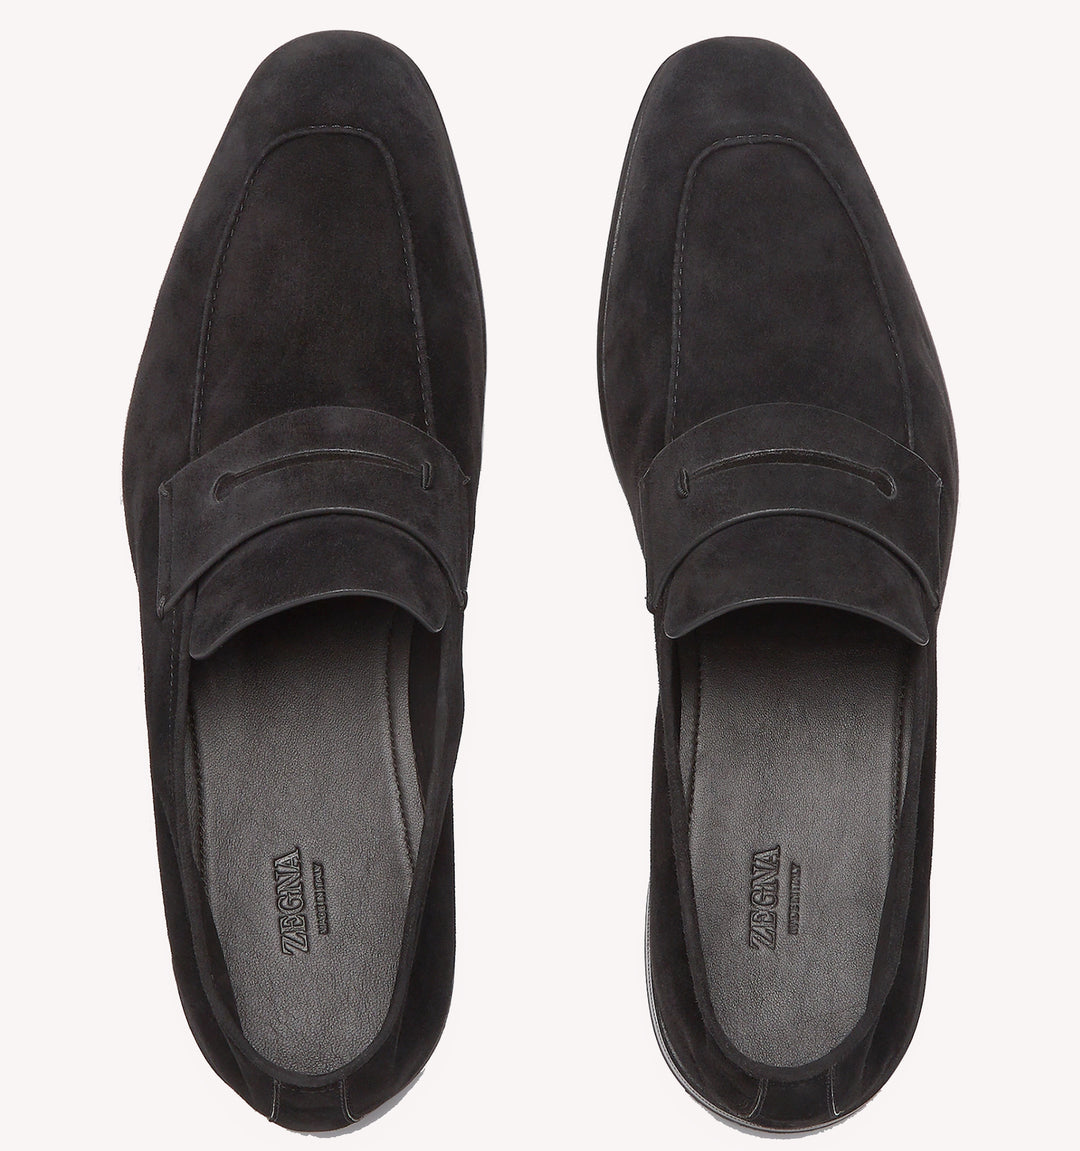 Zegna L'asola Suede Loafers in Black